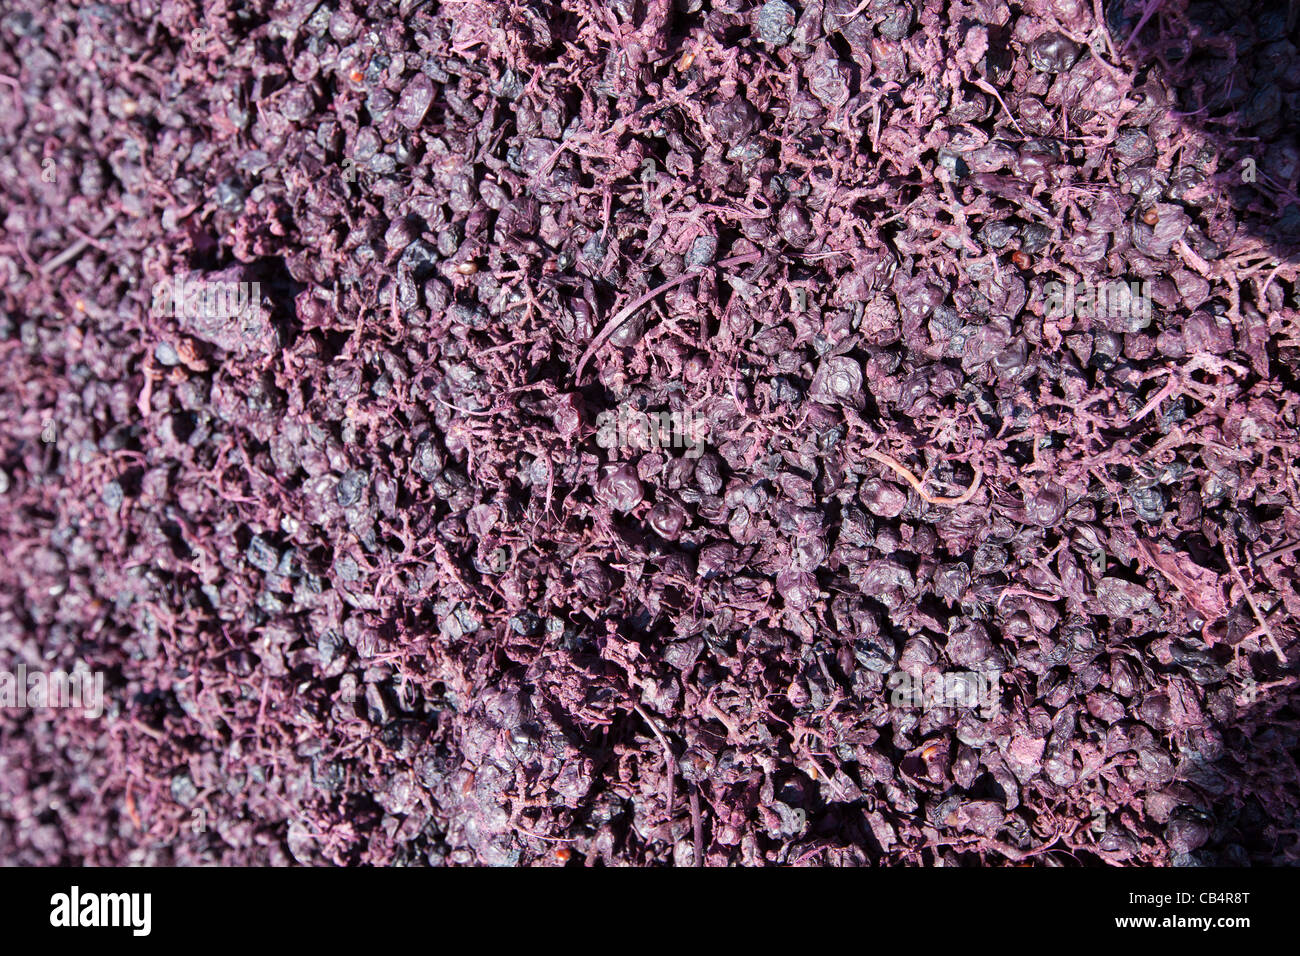 Rachis of crushed grapes (stems and grapes) for wine making , drying in the sun, in La Rioja, Spain 111238 Spain Stock Photo